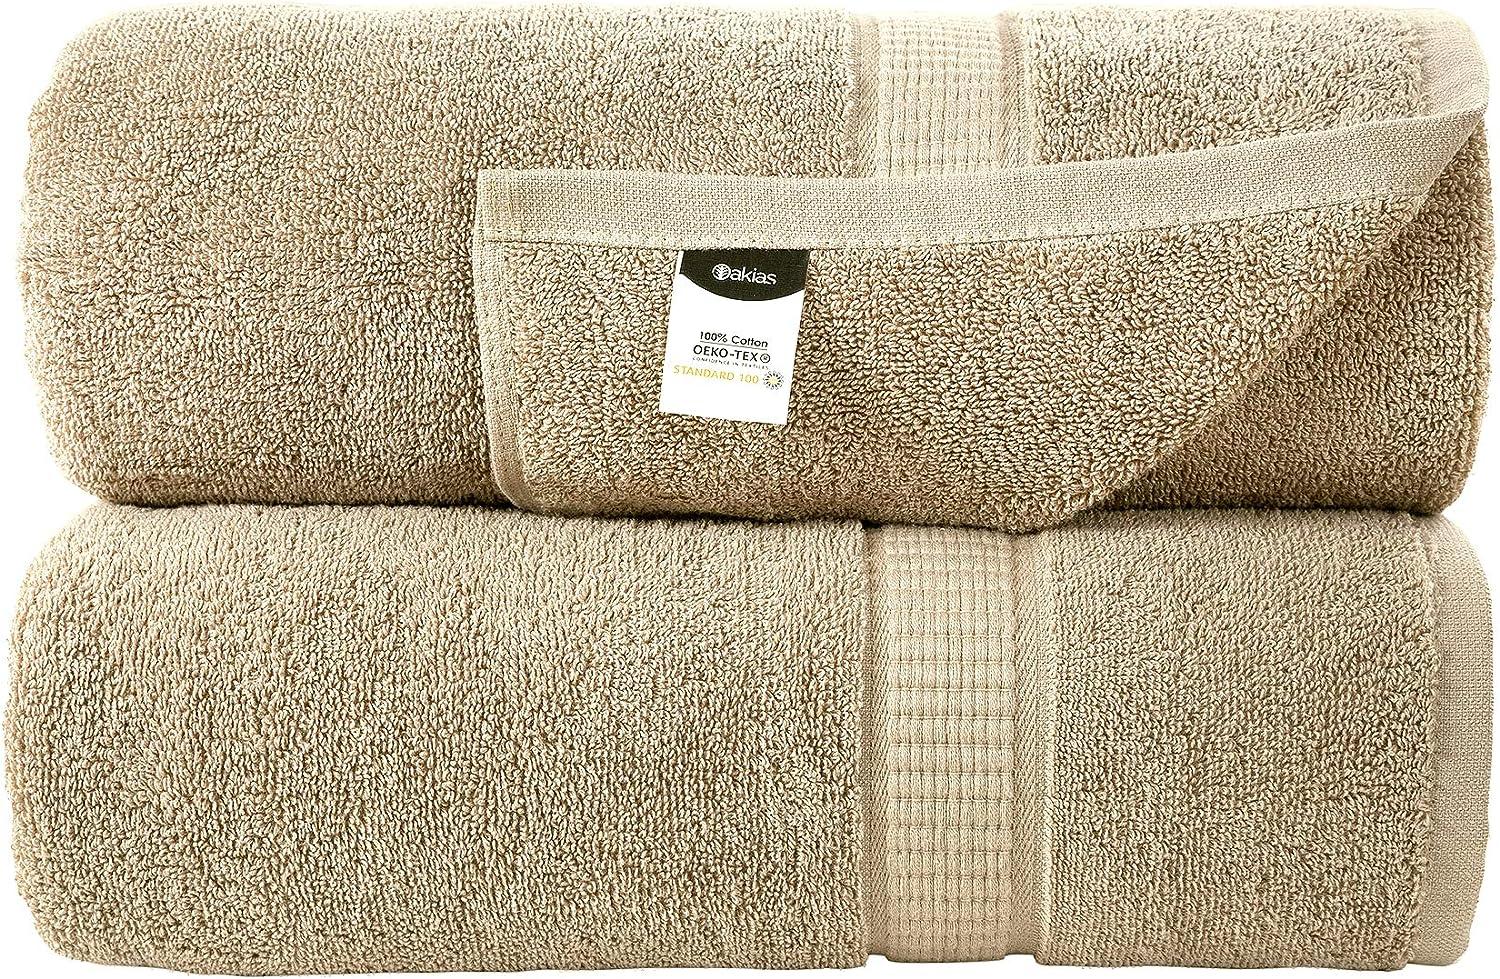 Oakias 2 Pack Luxury Bath Sheets Beige 35 x 70 Inches Highly Absorbent &  Soft 600